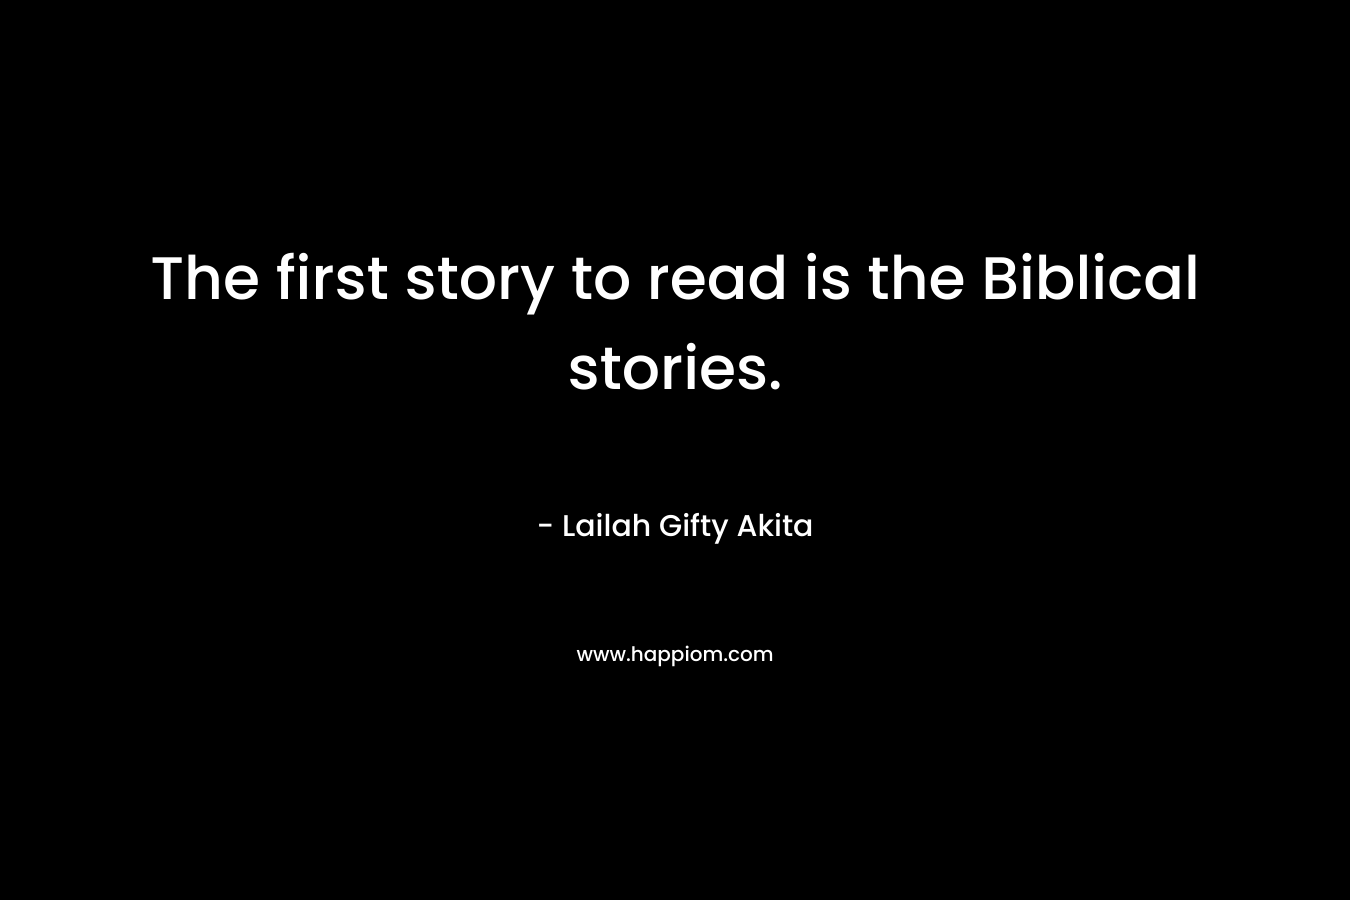 The first story to read is the Biblical stories.